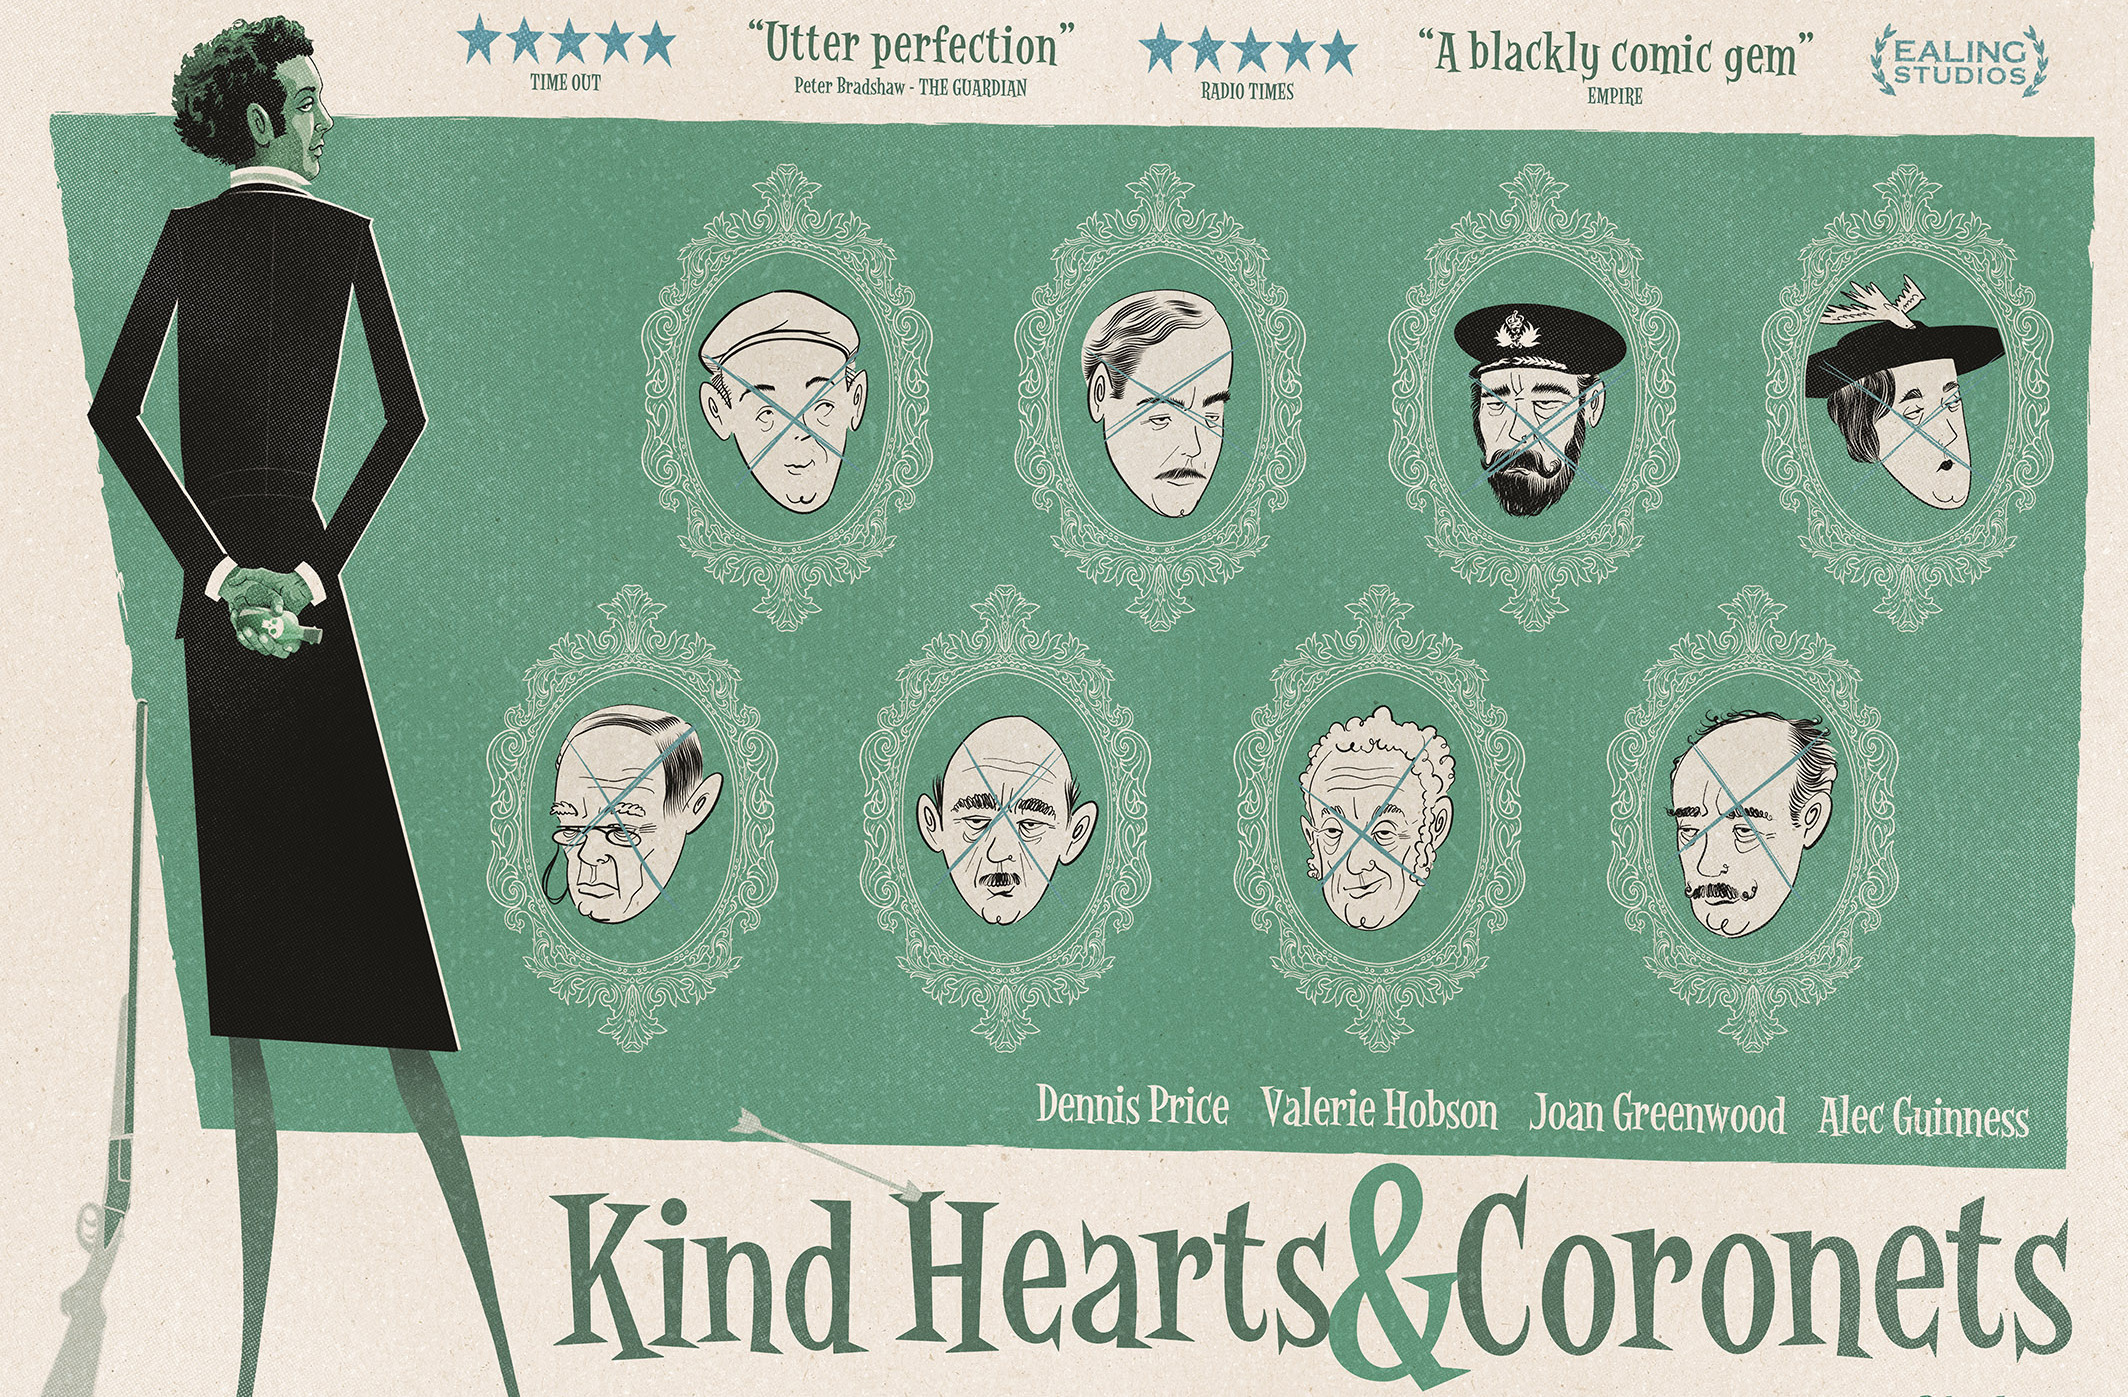 42-facts-about-the-movie-kind-hearts-and-coronets